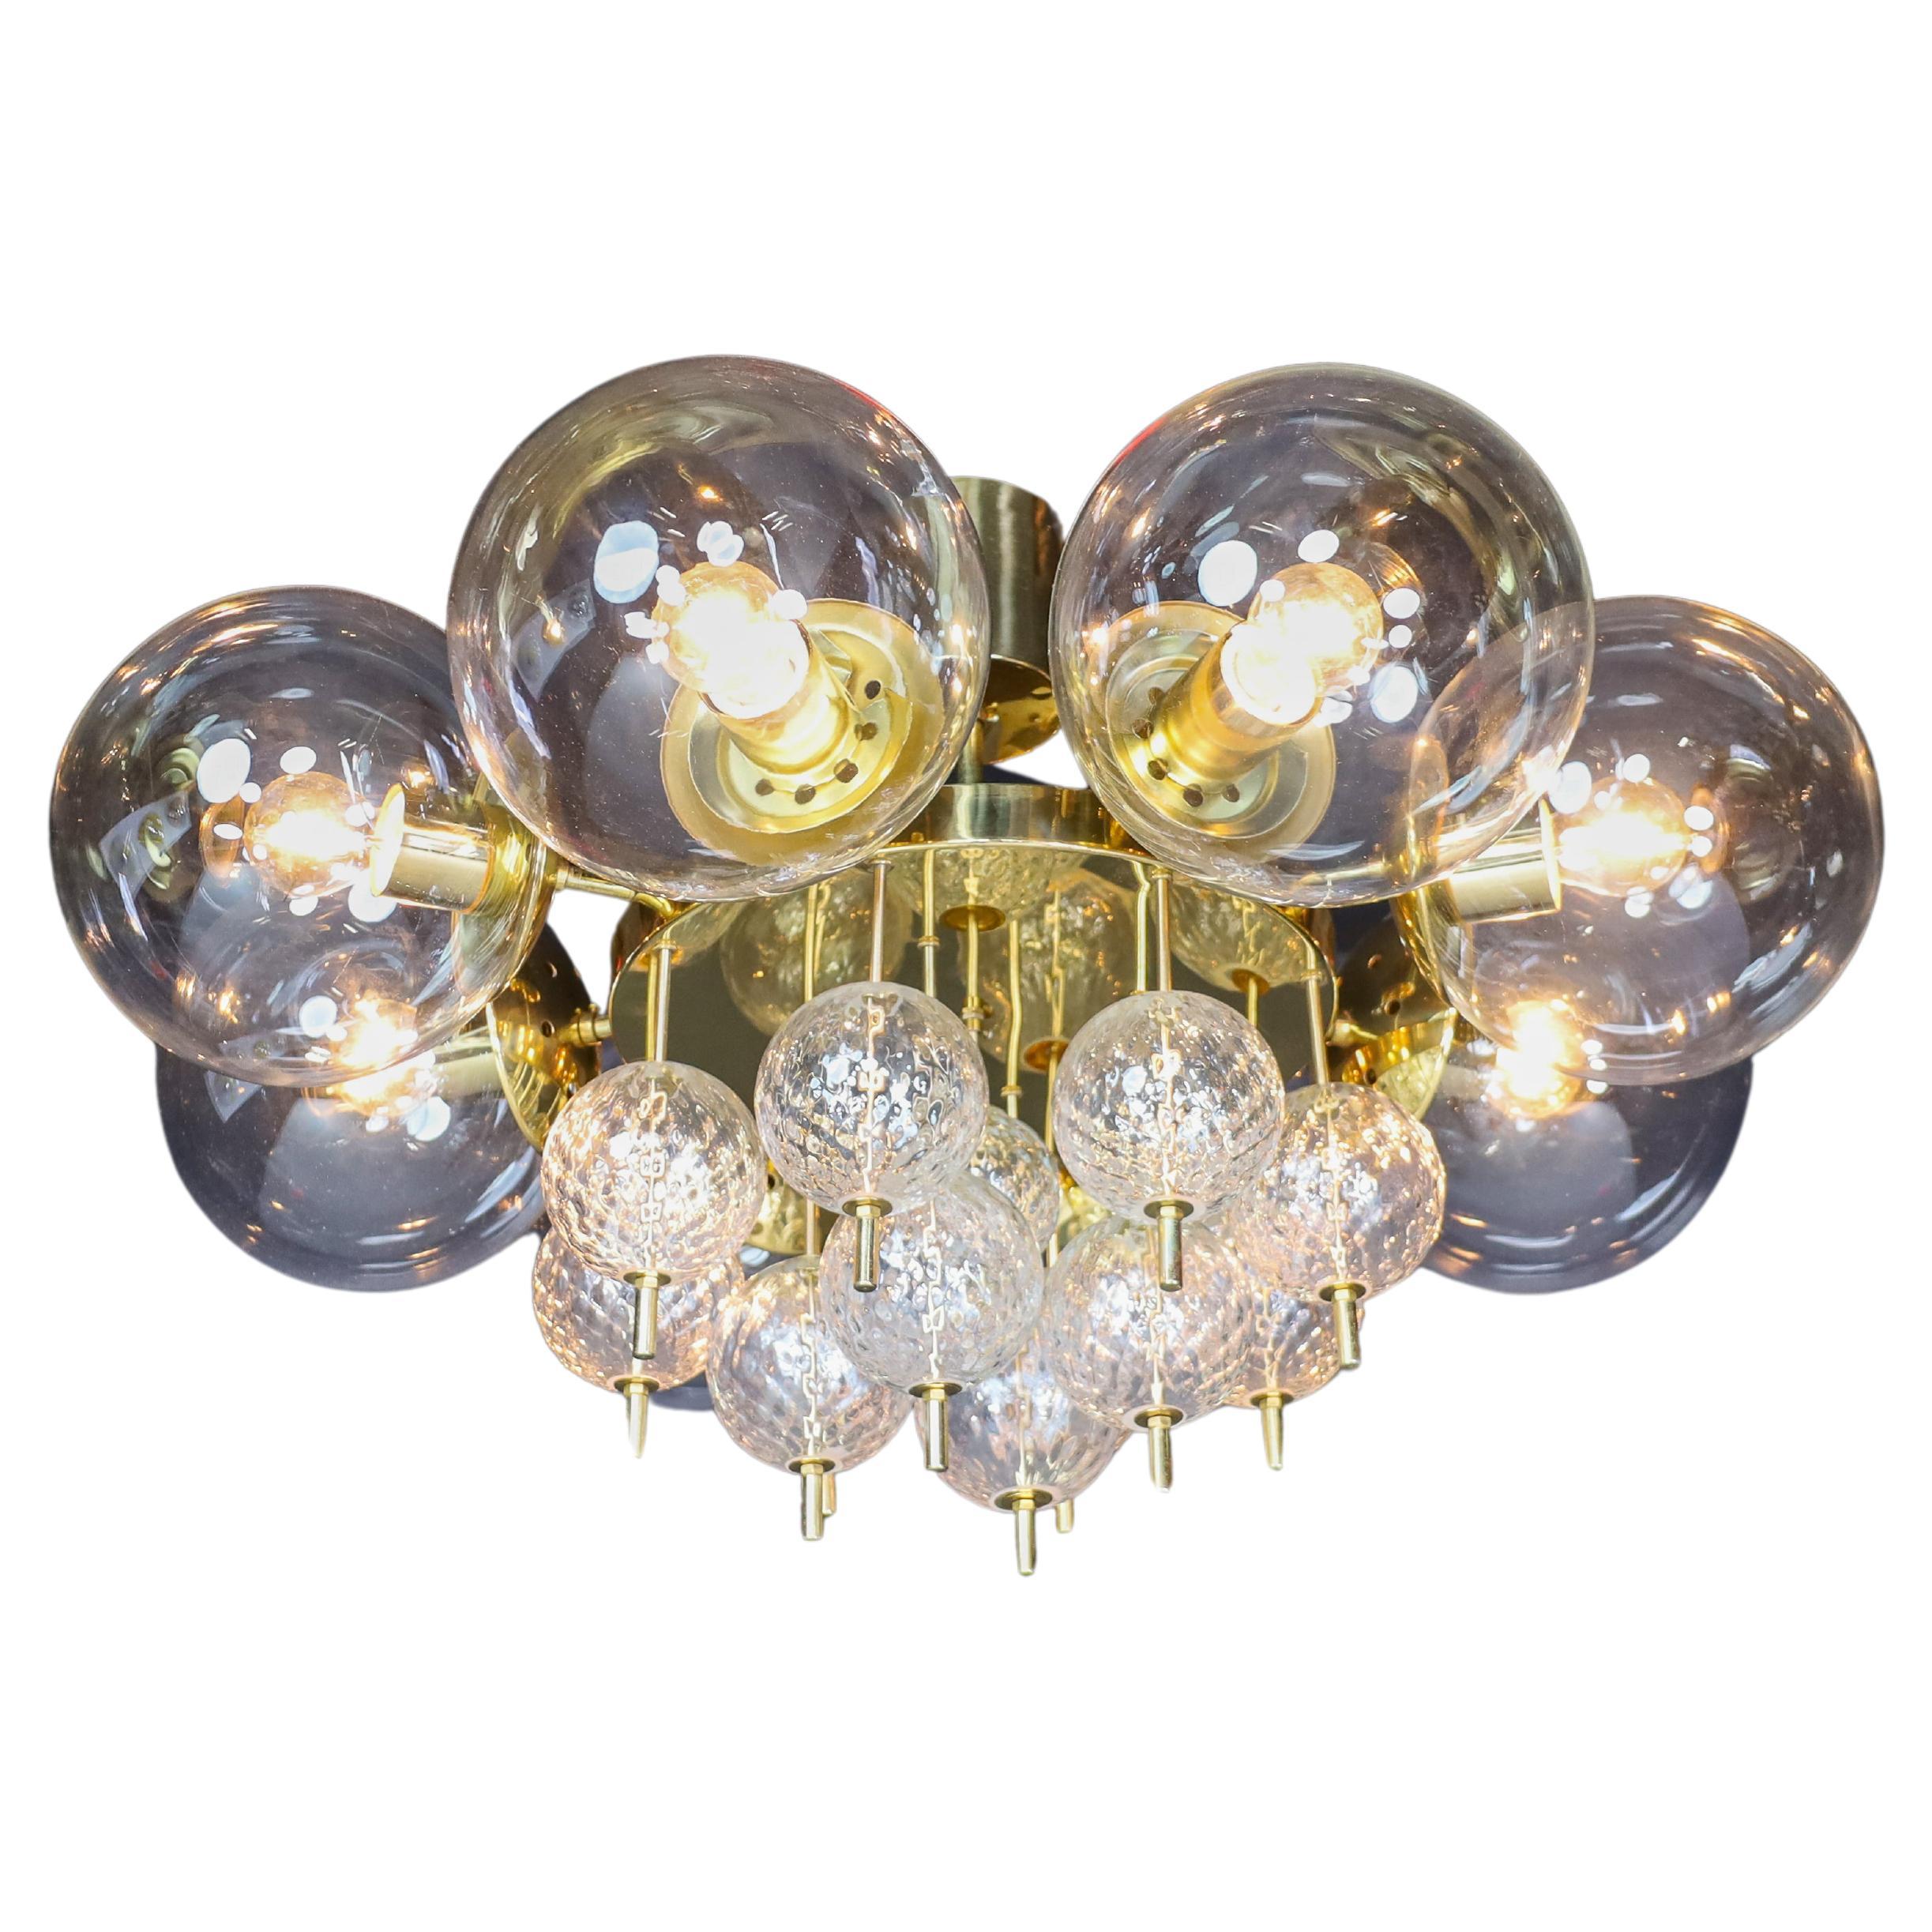 Large Mid-Century Preciosa Chandelier Brass and Glass Globes Czechia 1960s For Sale